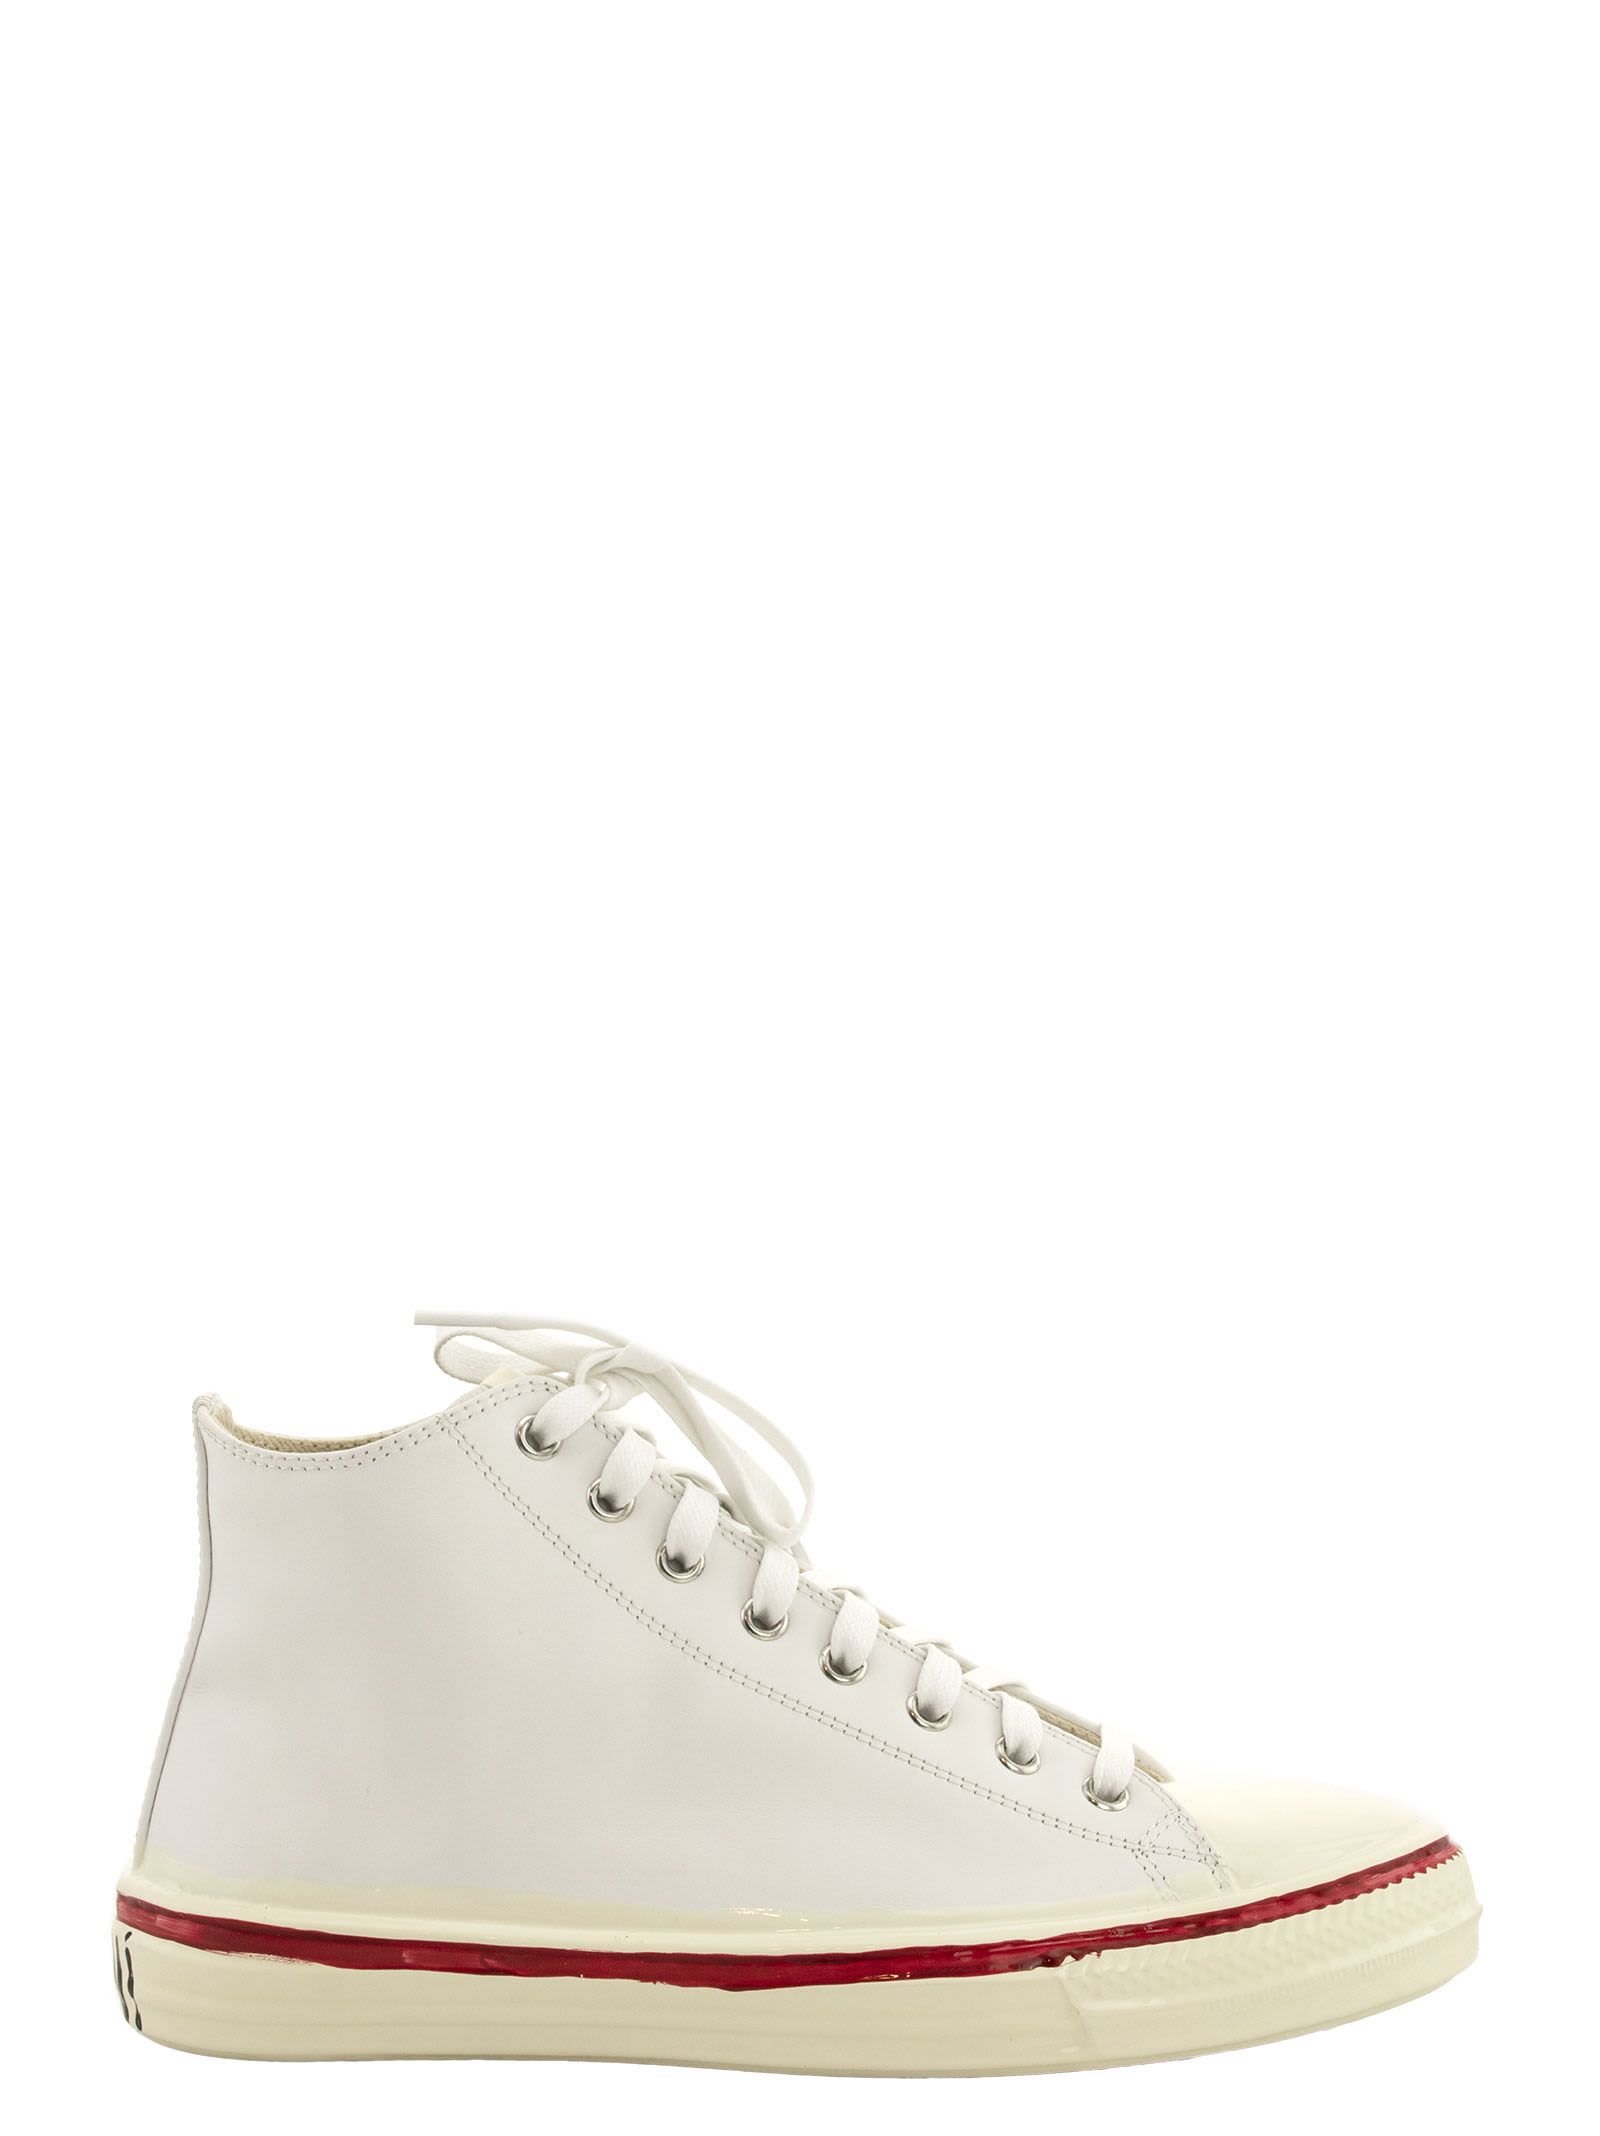 Marni Graffiti White High-top Sneaker In Leather With Partial Rubber Coating